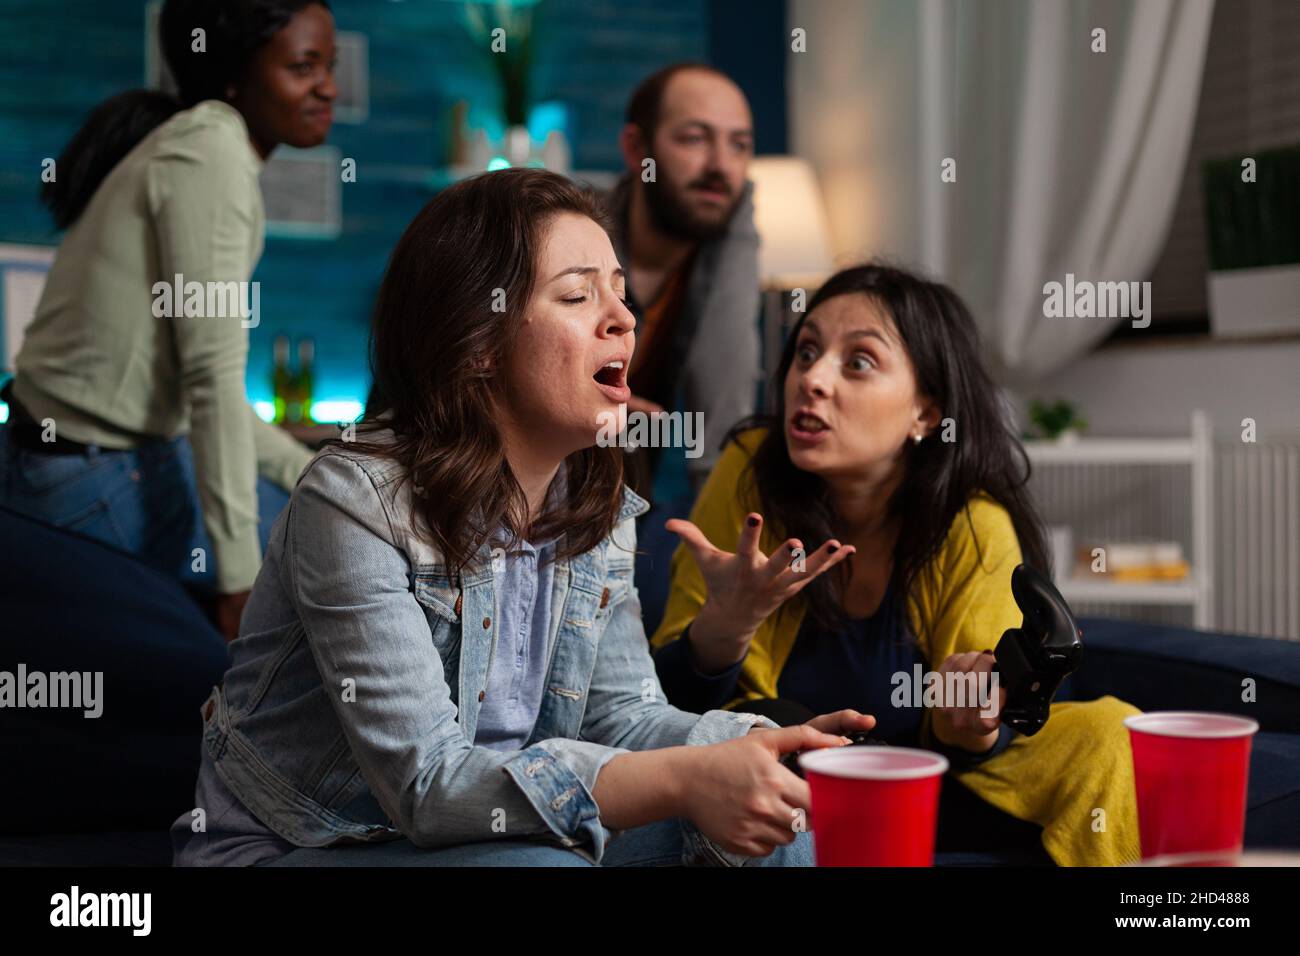 Nevours upset women sitting on sofa playing video games using gaming joystick losing online competition. Group of multi-ethnic friends hanging out together having fun during wekeend party at home Stock Photo